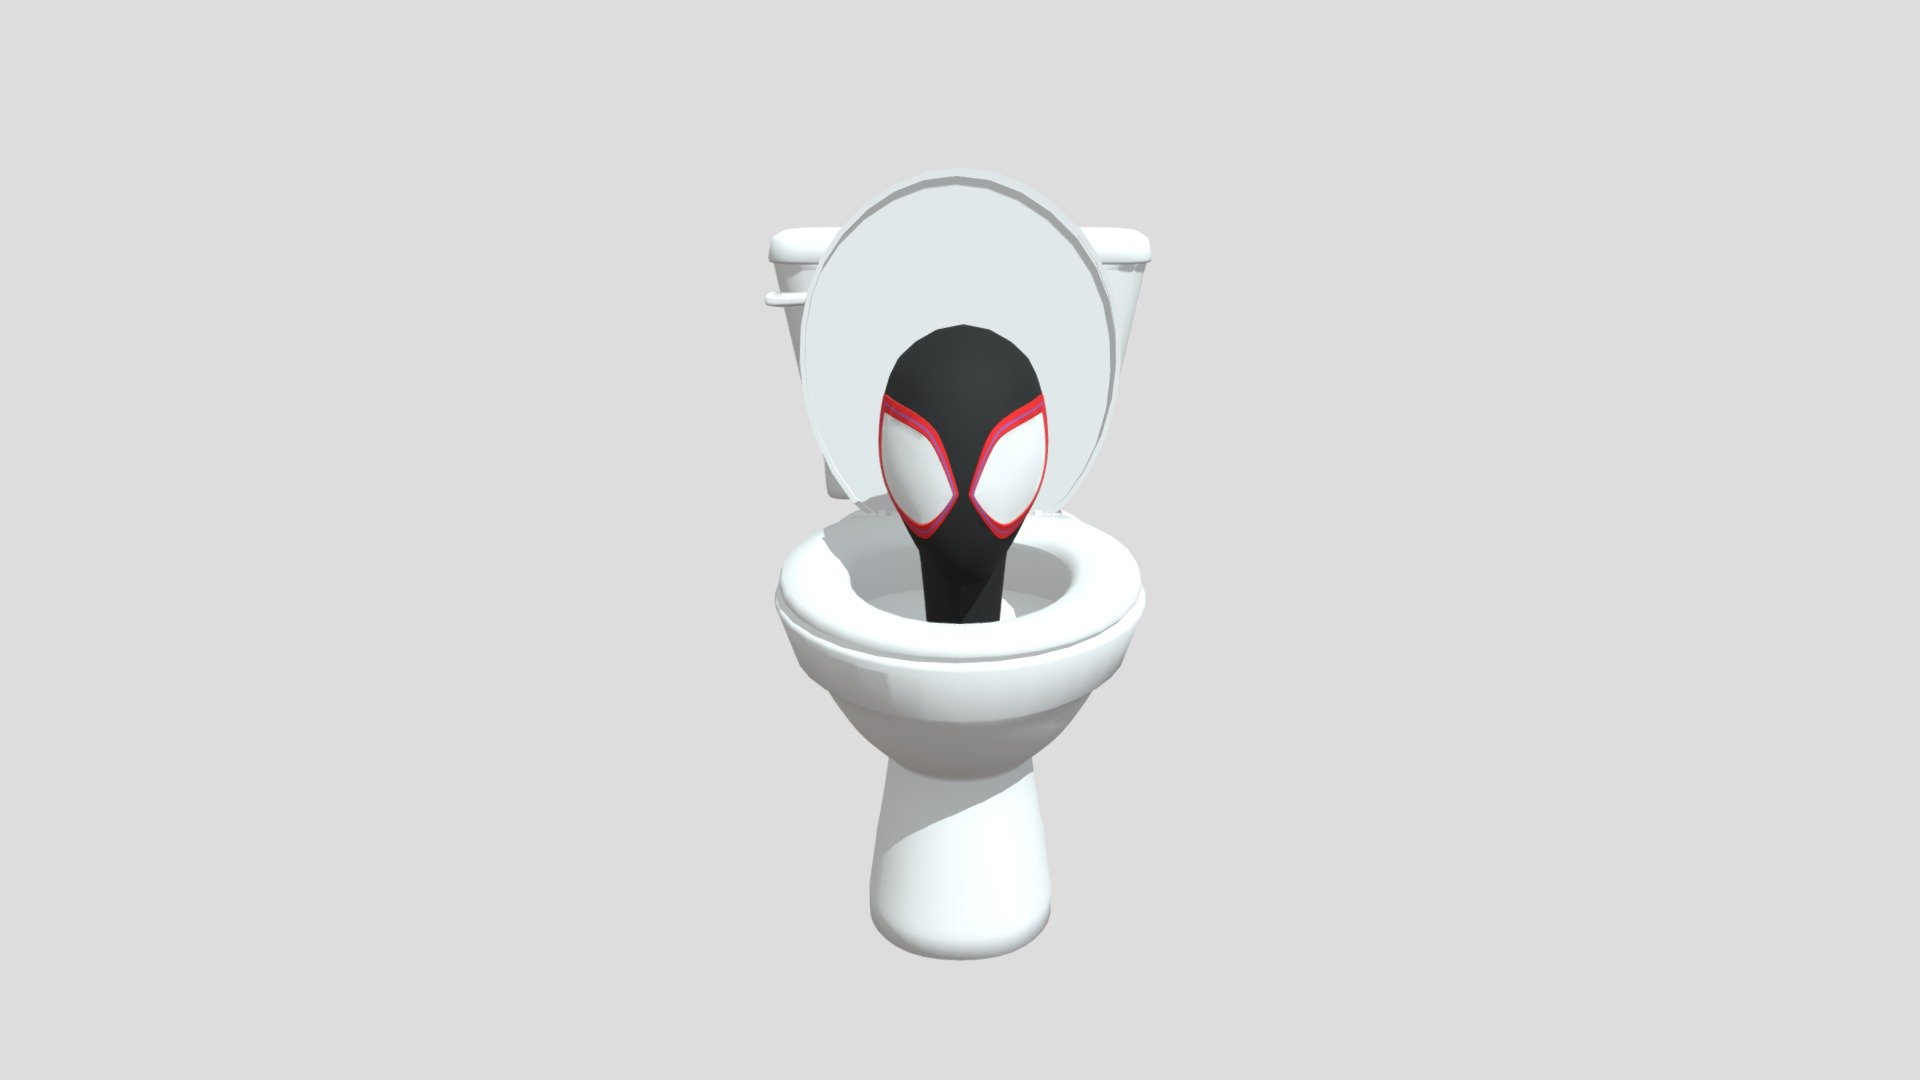 this is a version of skibdi toilet miles morales that i made, I have made a rigged one check my account.
Models Used: https://sketchfab.com/3d-models/skbidi-toilet-7526c483898346bdb880b37a04d982bf
https://sketchfab.com/3d-models/miles-from-spider-man-across-the-spider-verse-6585b5cd701d4b11a66618e20b7c8df7 - Skibidi toilet Miles Morales V1 - Download Free 3D model by Noob_3d (@adambarak24) 3d model